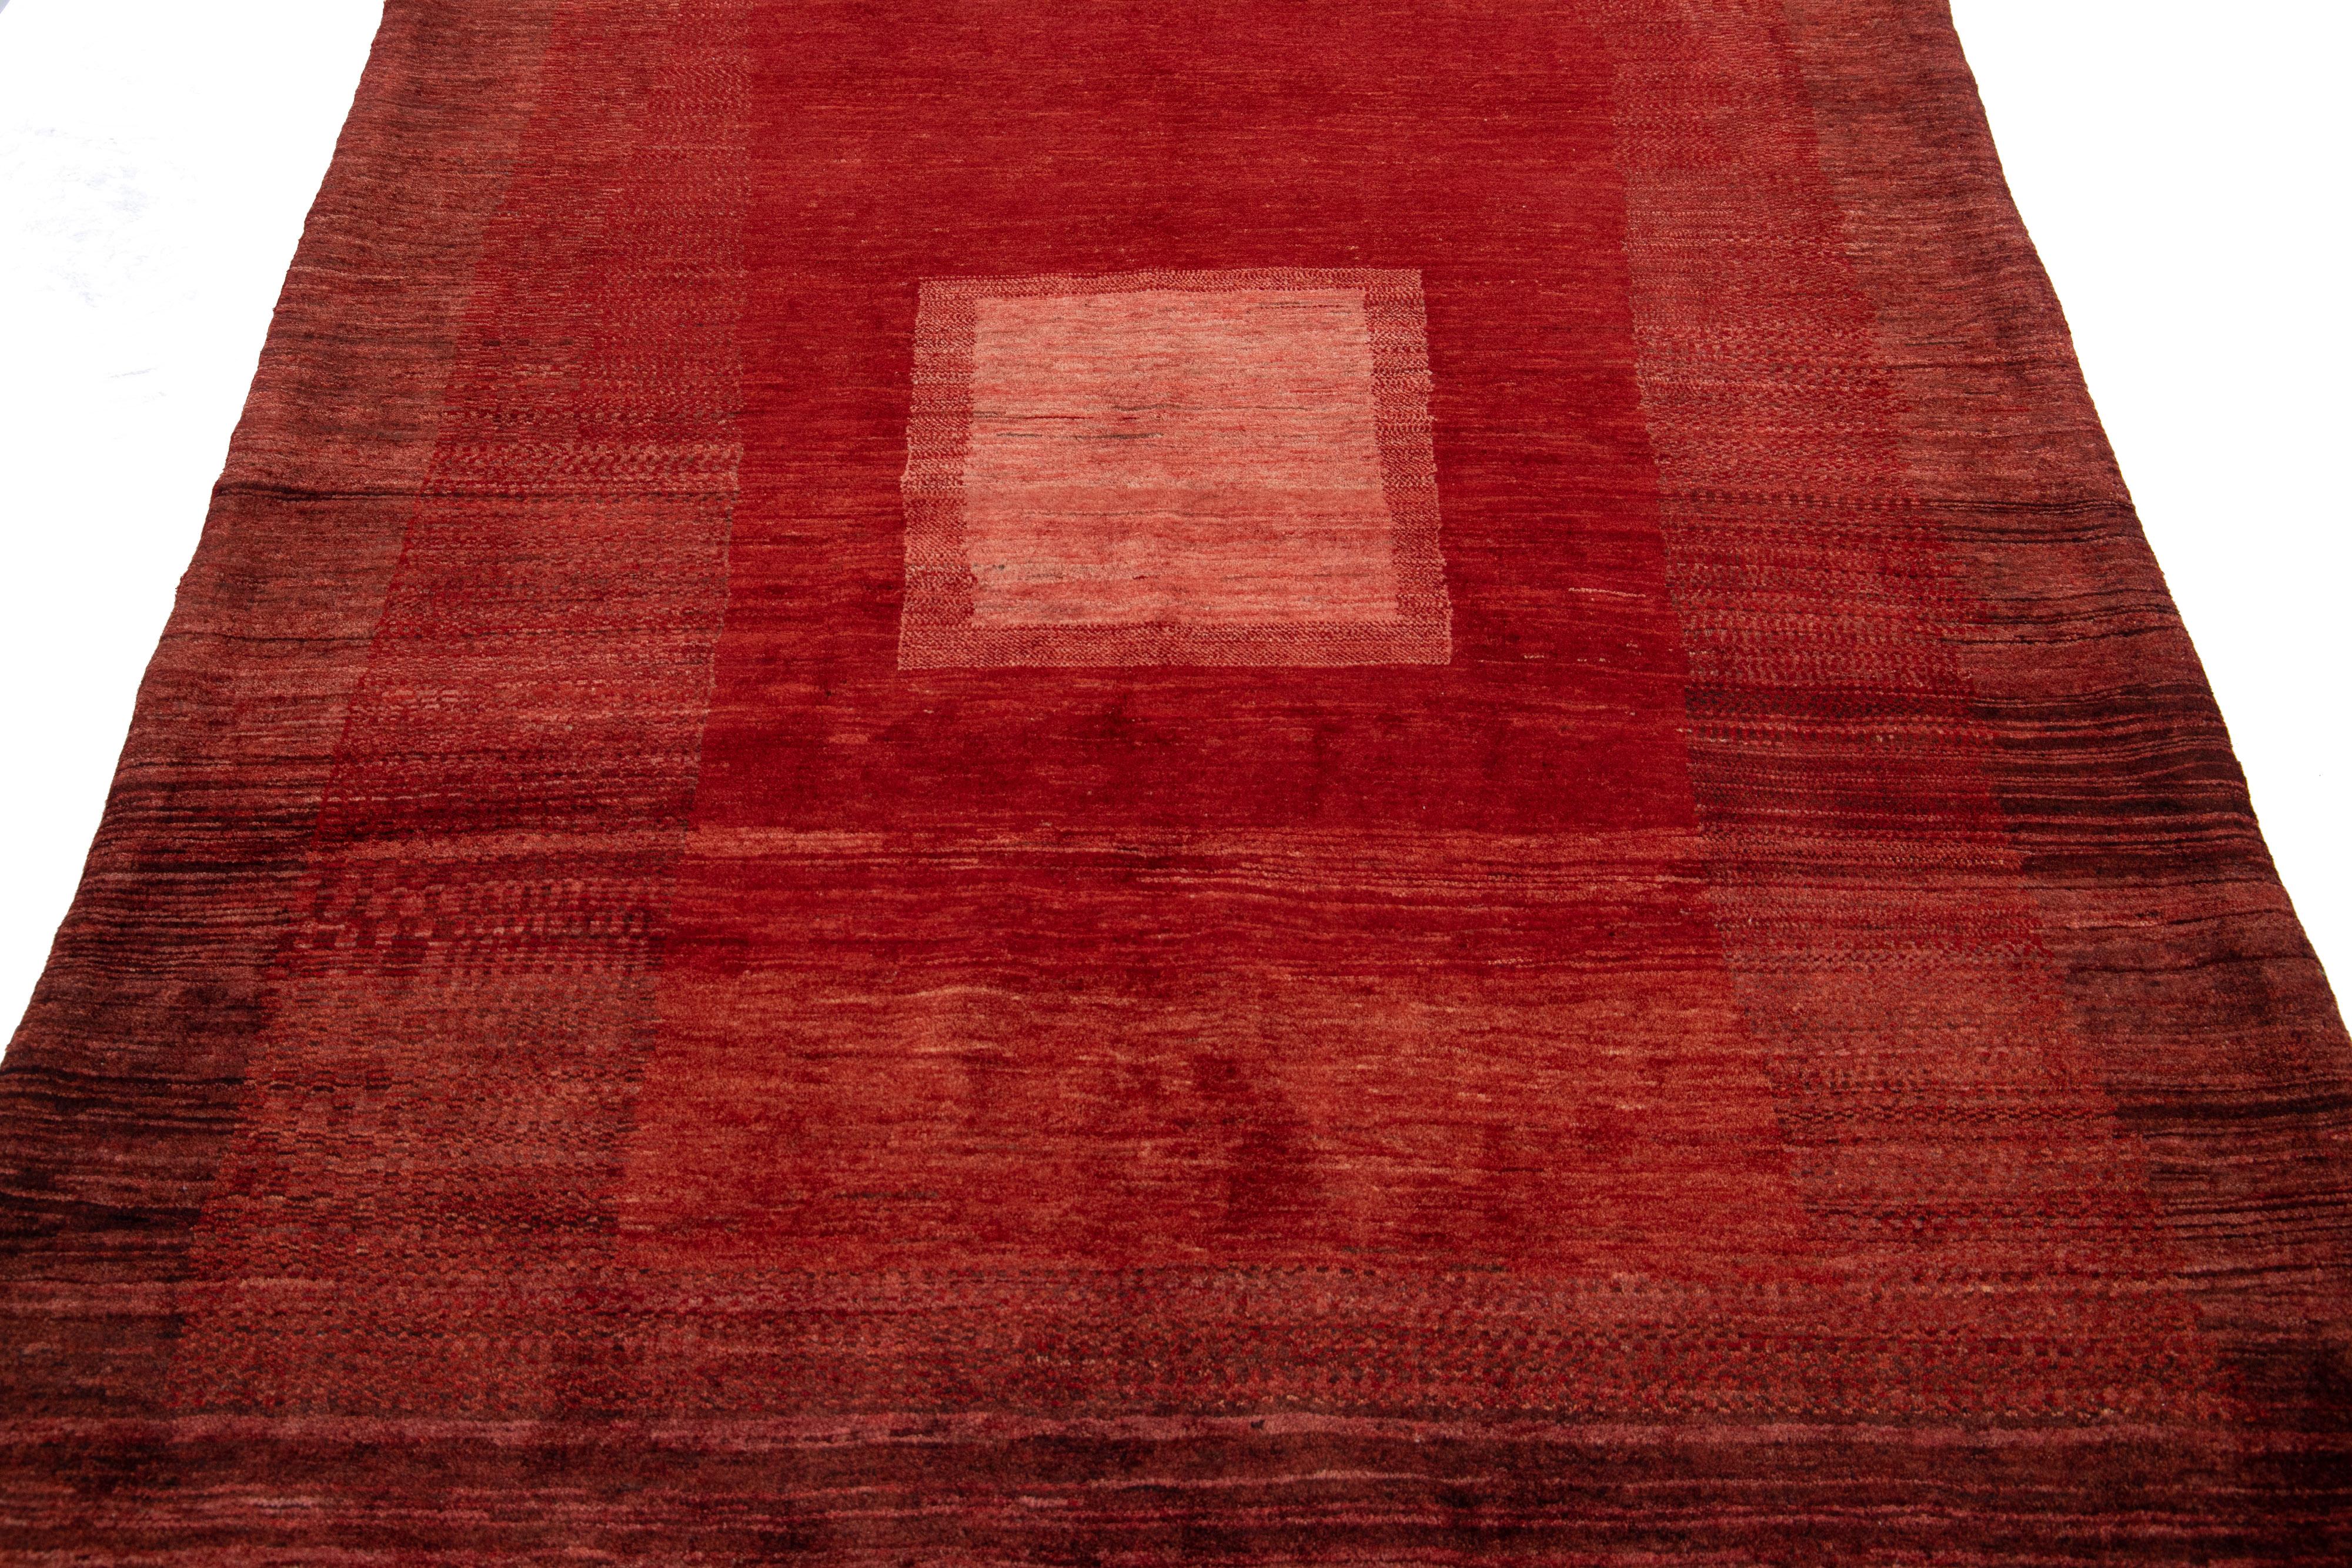 Beautiful modern Gabbeh-style hand-woven wool rug with a red color field. This Persian rug has a gorgeously minimalist design with light red accents.

This rug measures: 4'11